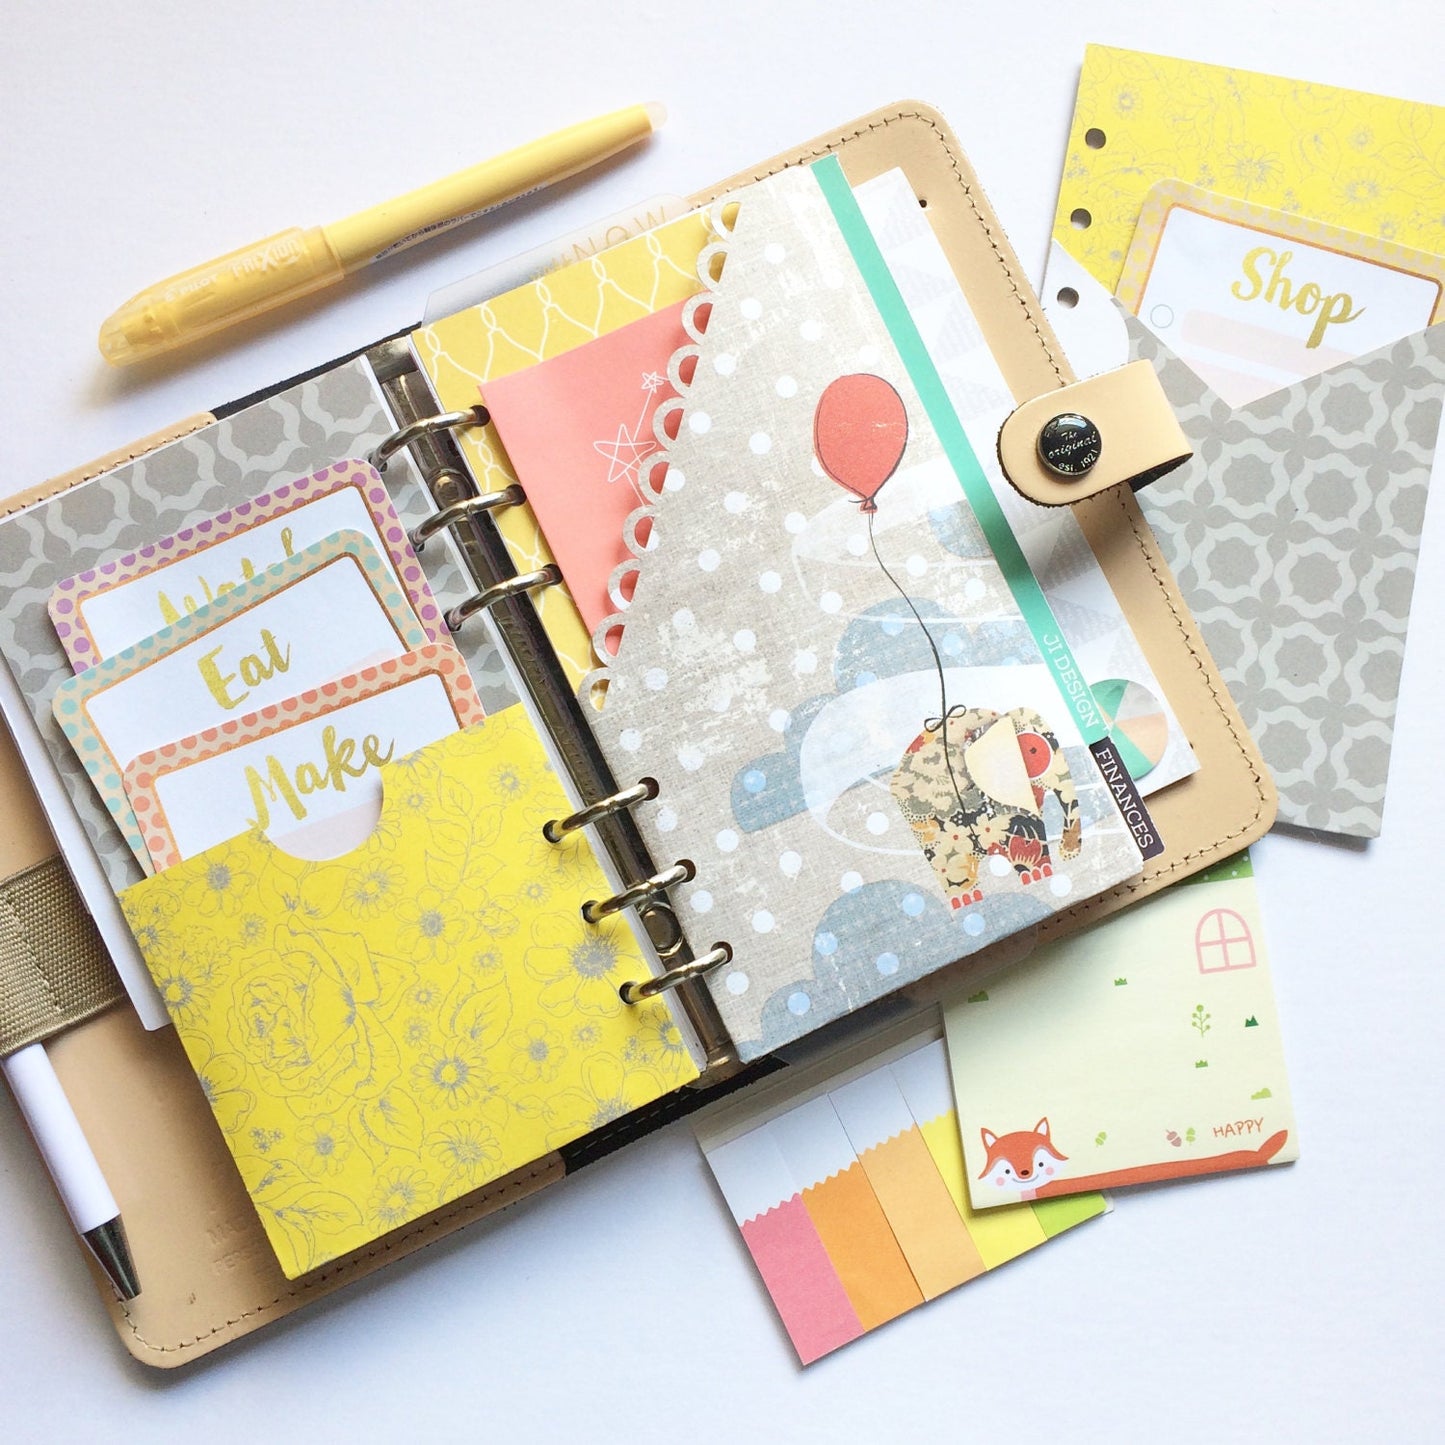 Personal Ring PLANNER POCKETS Cutting Files Set